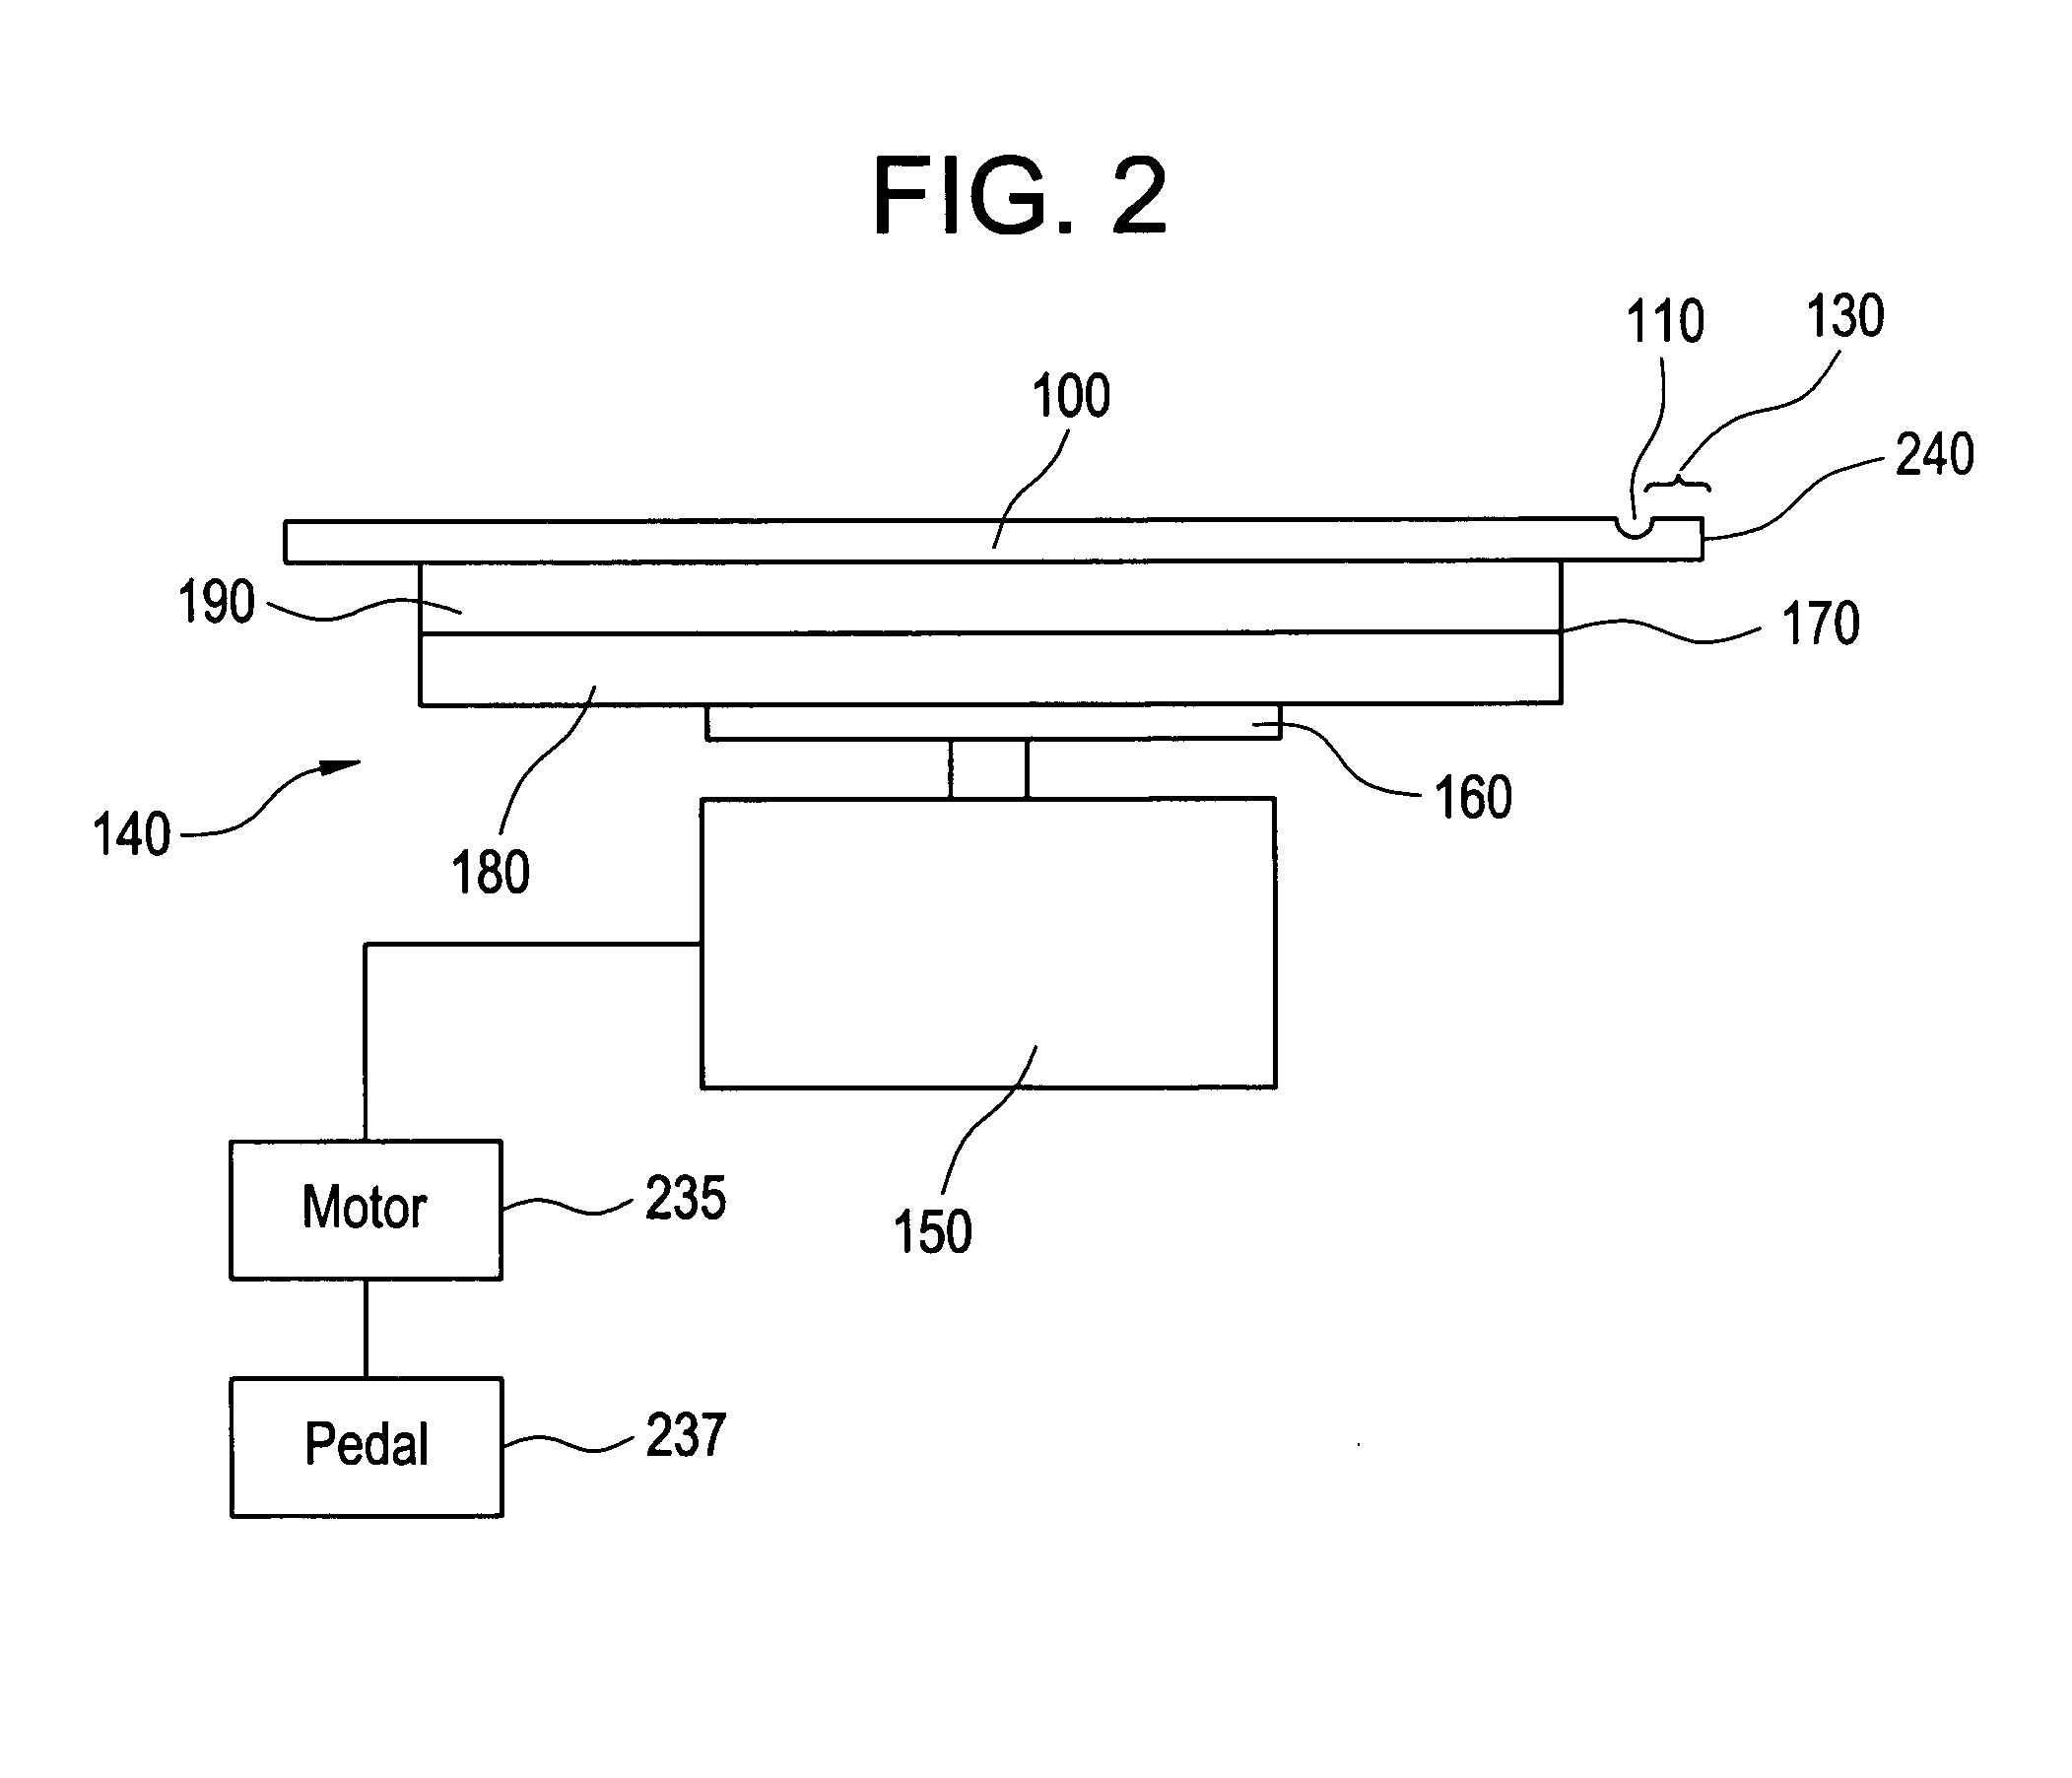 Apparatus and method for glass separation for flat panel displays